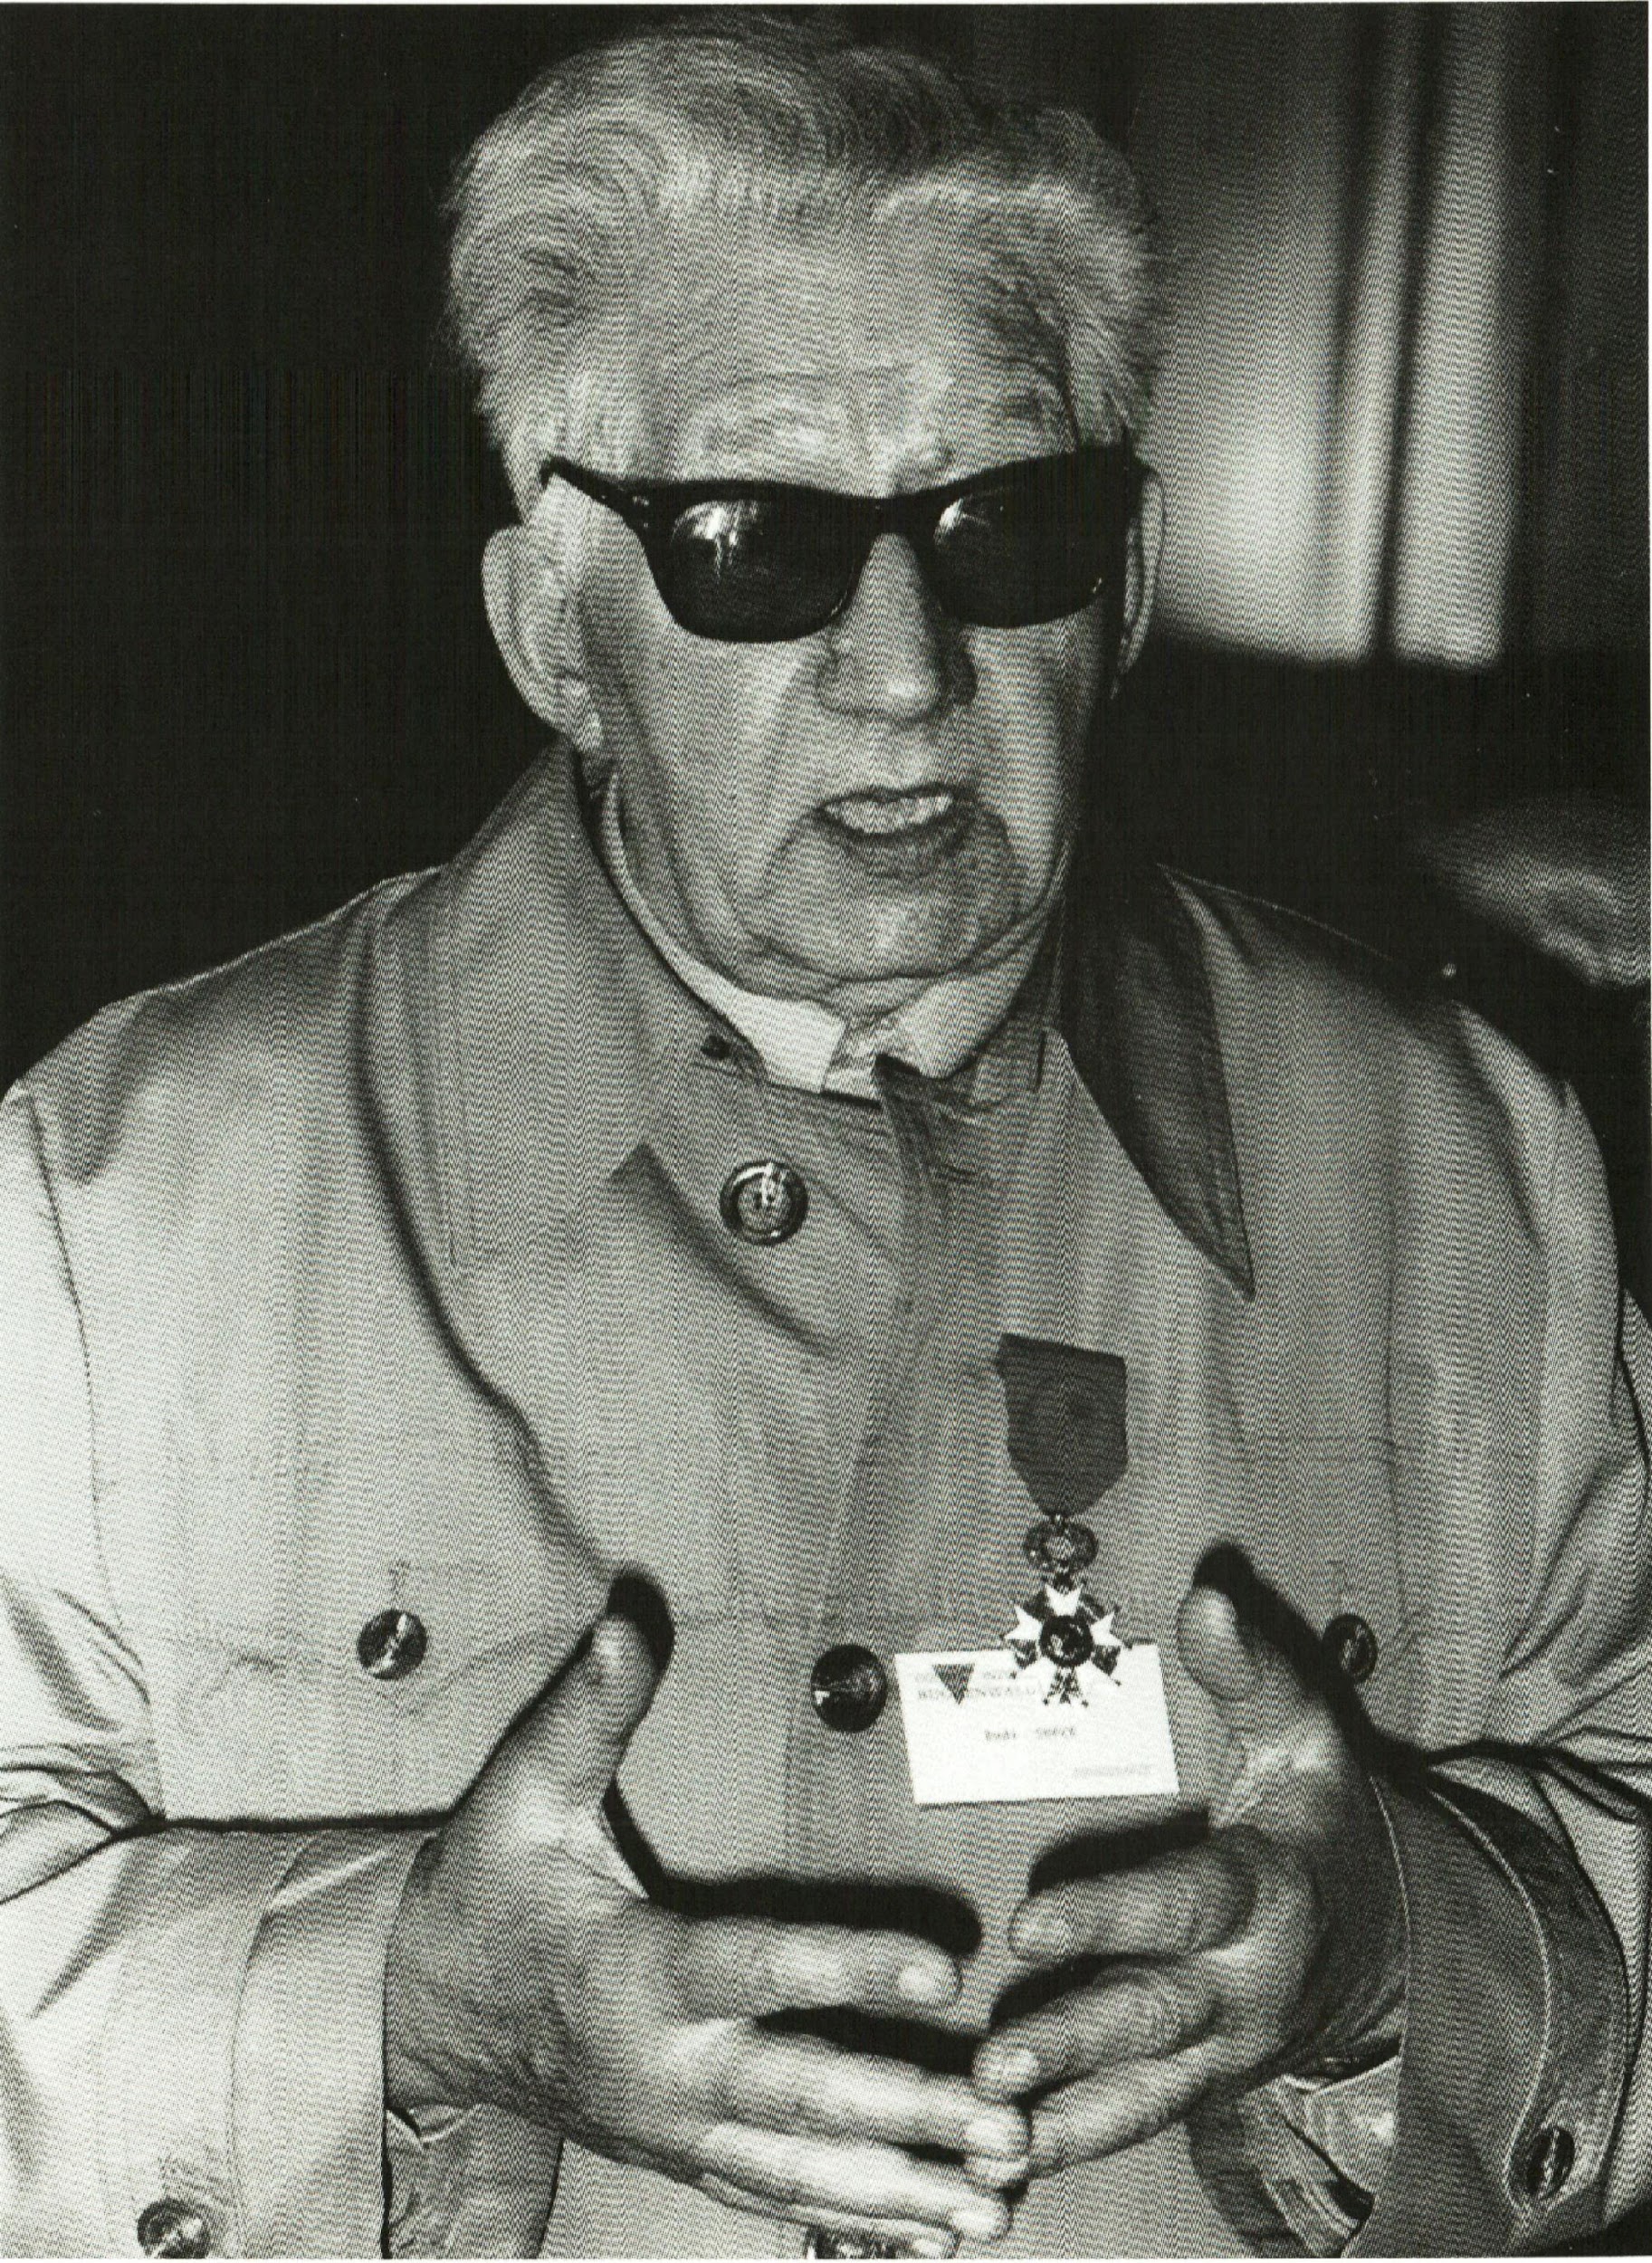 Rudi Supek, with the National Order of the Legion of Honour (Ordre national de la Légion d'honneur) in 1989, which is the highest French order of merit for military and civil merits. 